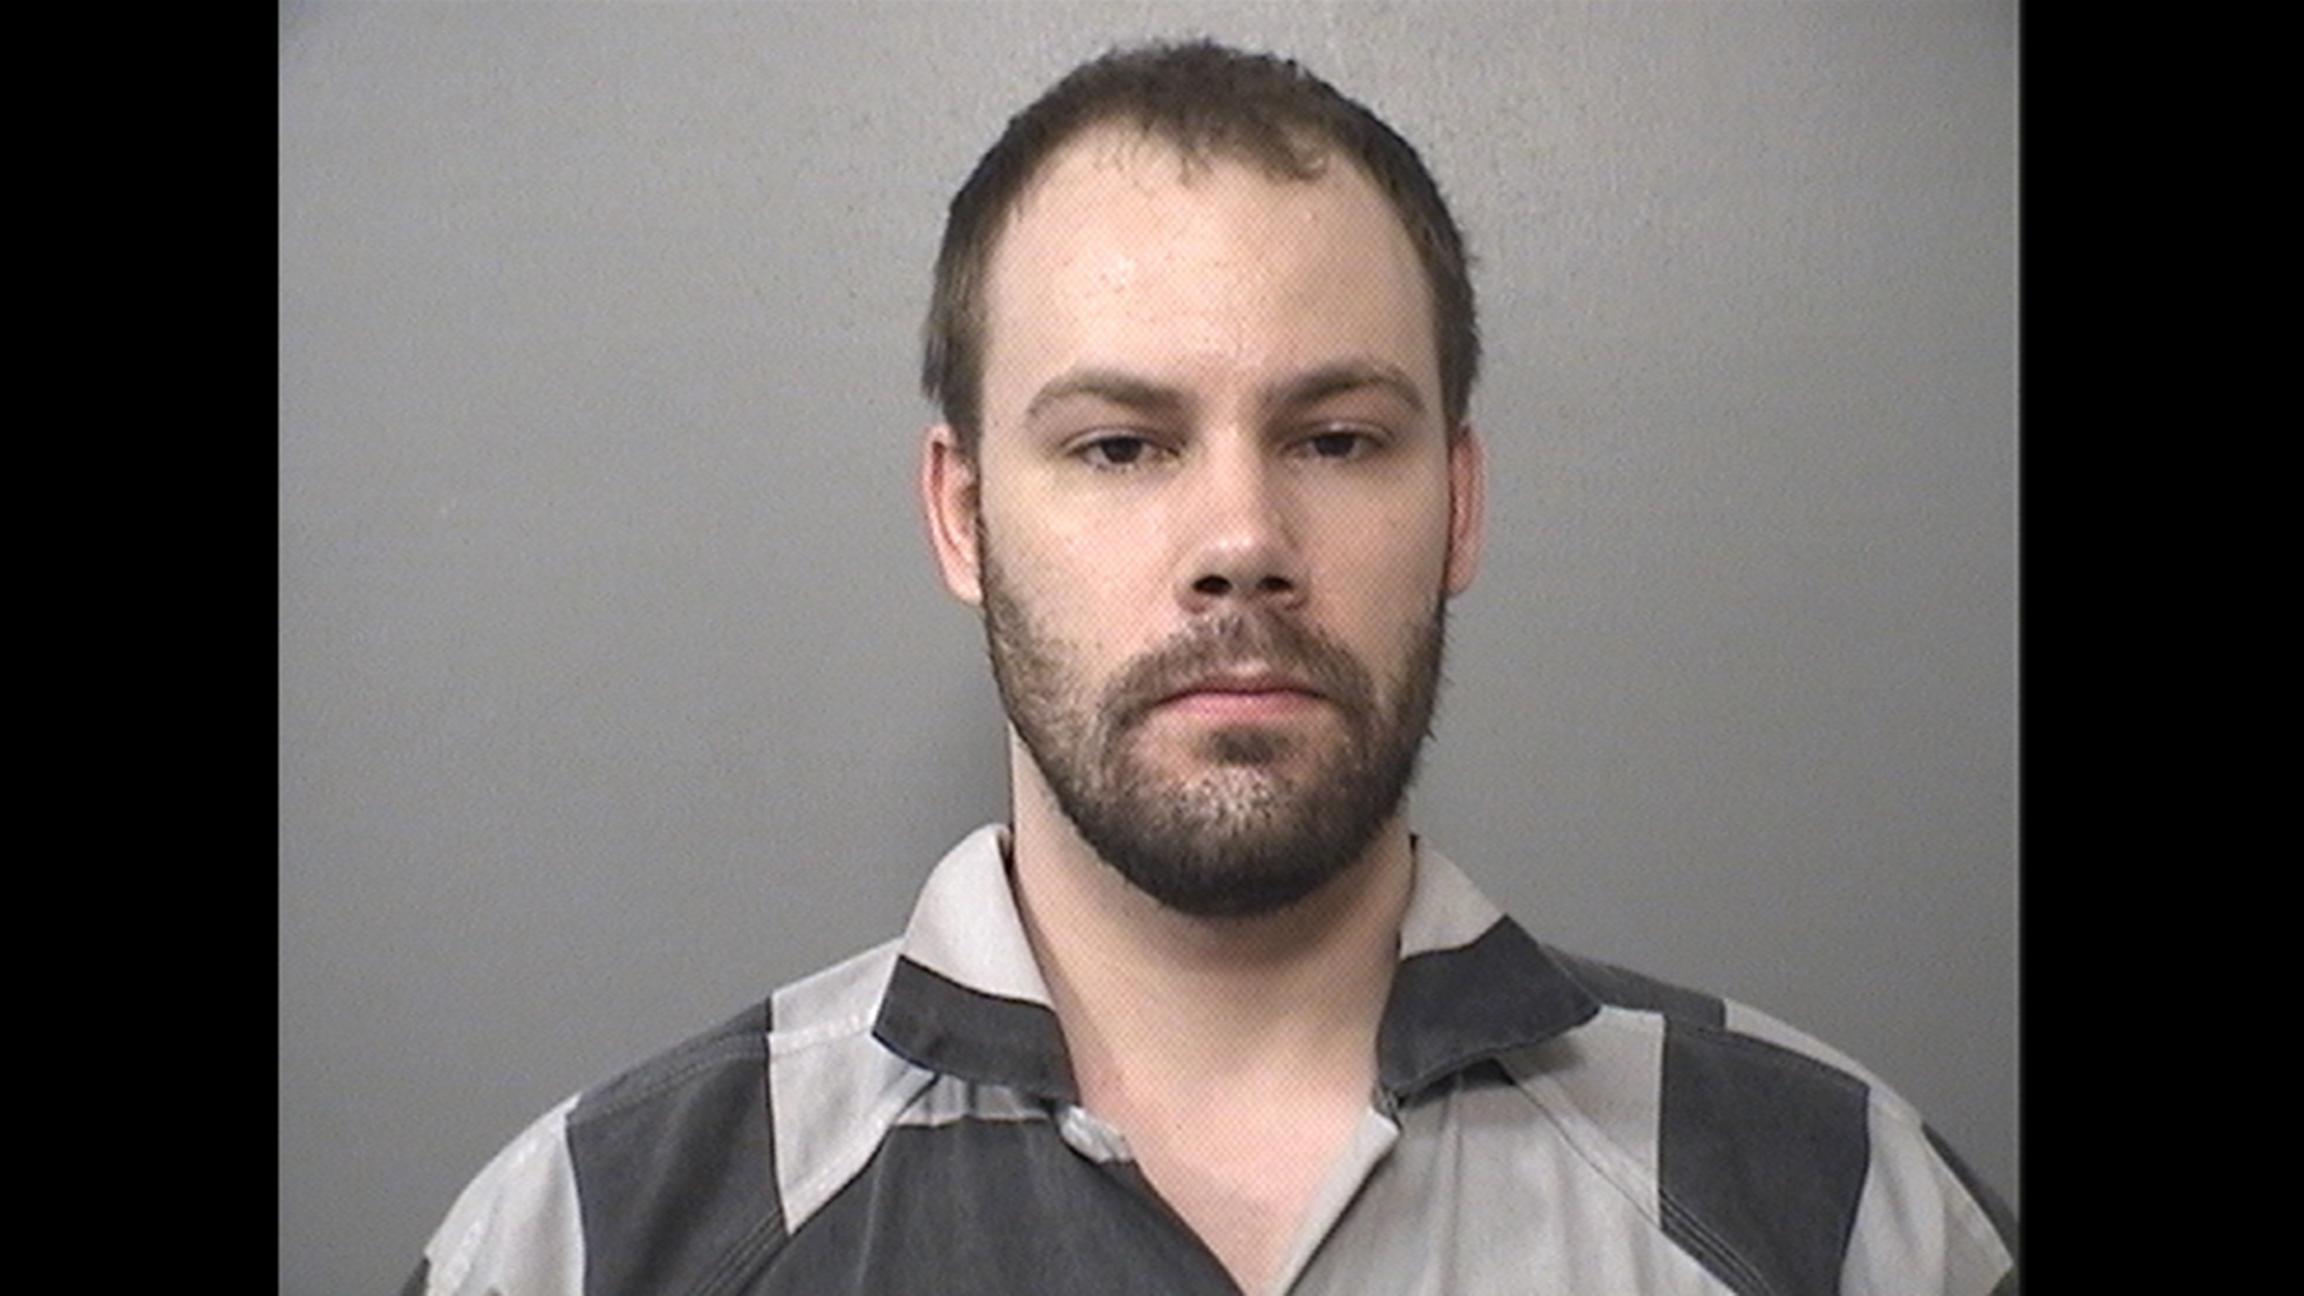 Brendt Christensen could face the death penalty if convicted in the disappearance and murder of Yingying Zhang. (Macon County Sheriff's Department)